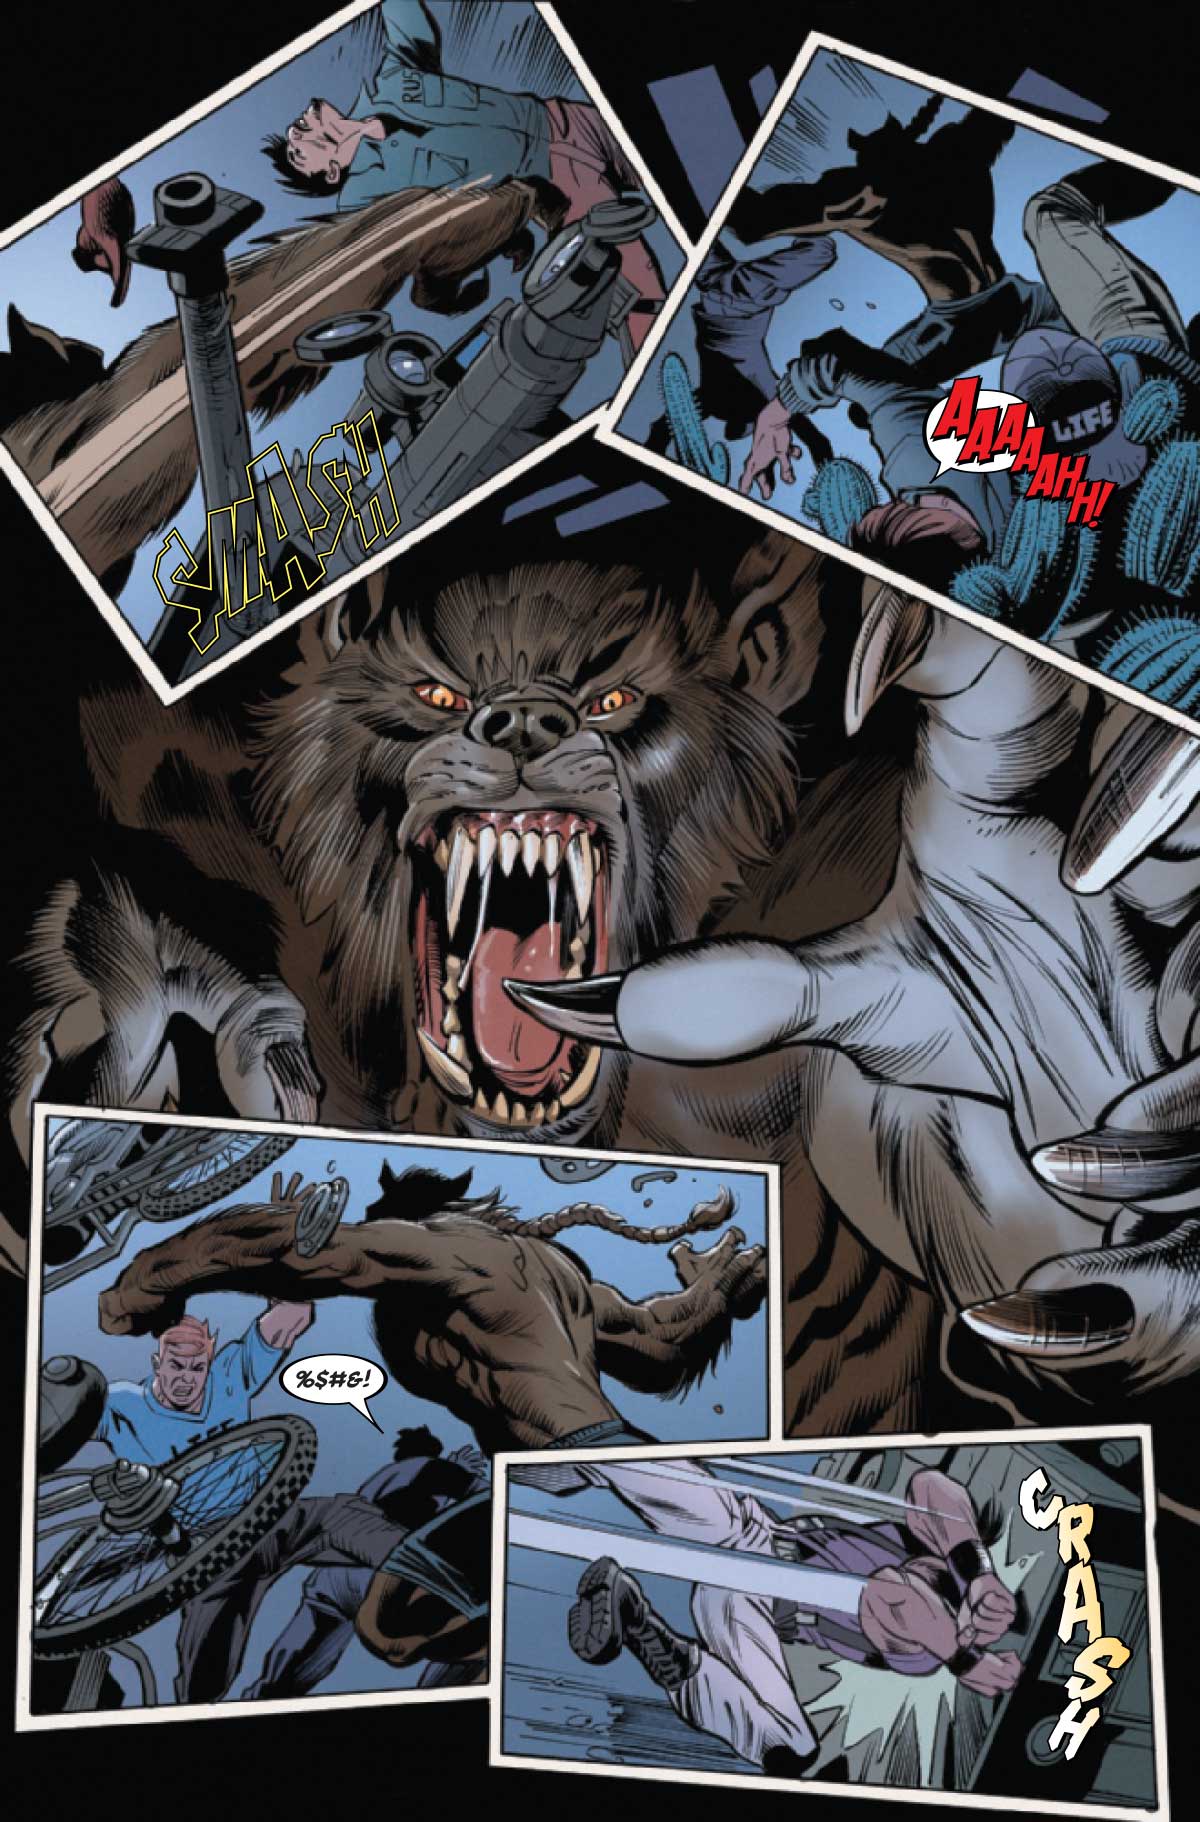 Werewolf By Night #1 Review — Major Spoilers — Comic Book Reviews